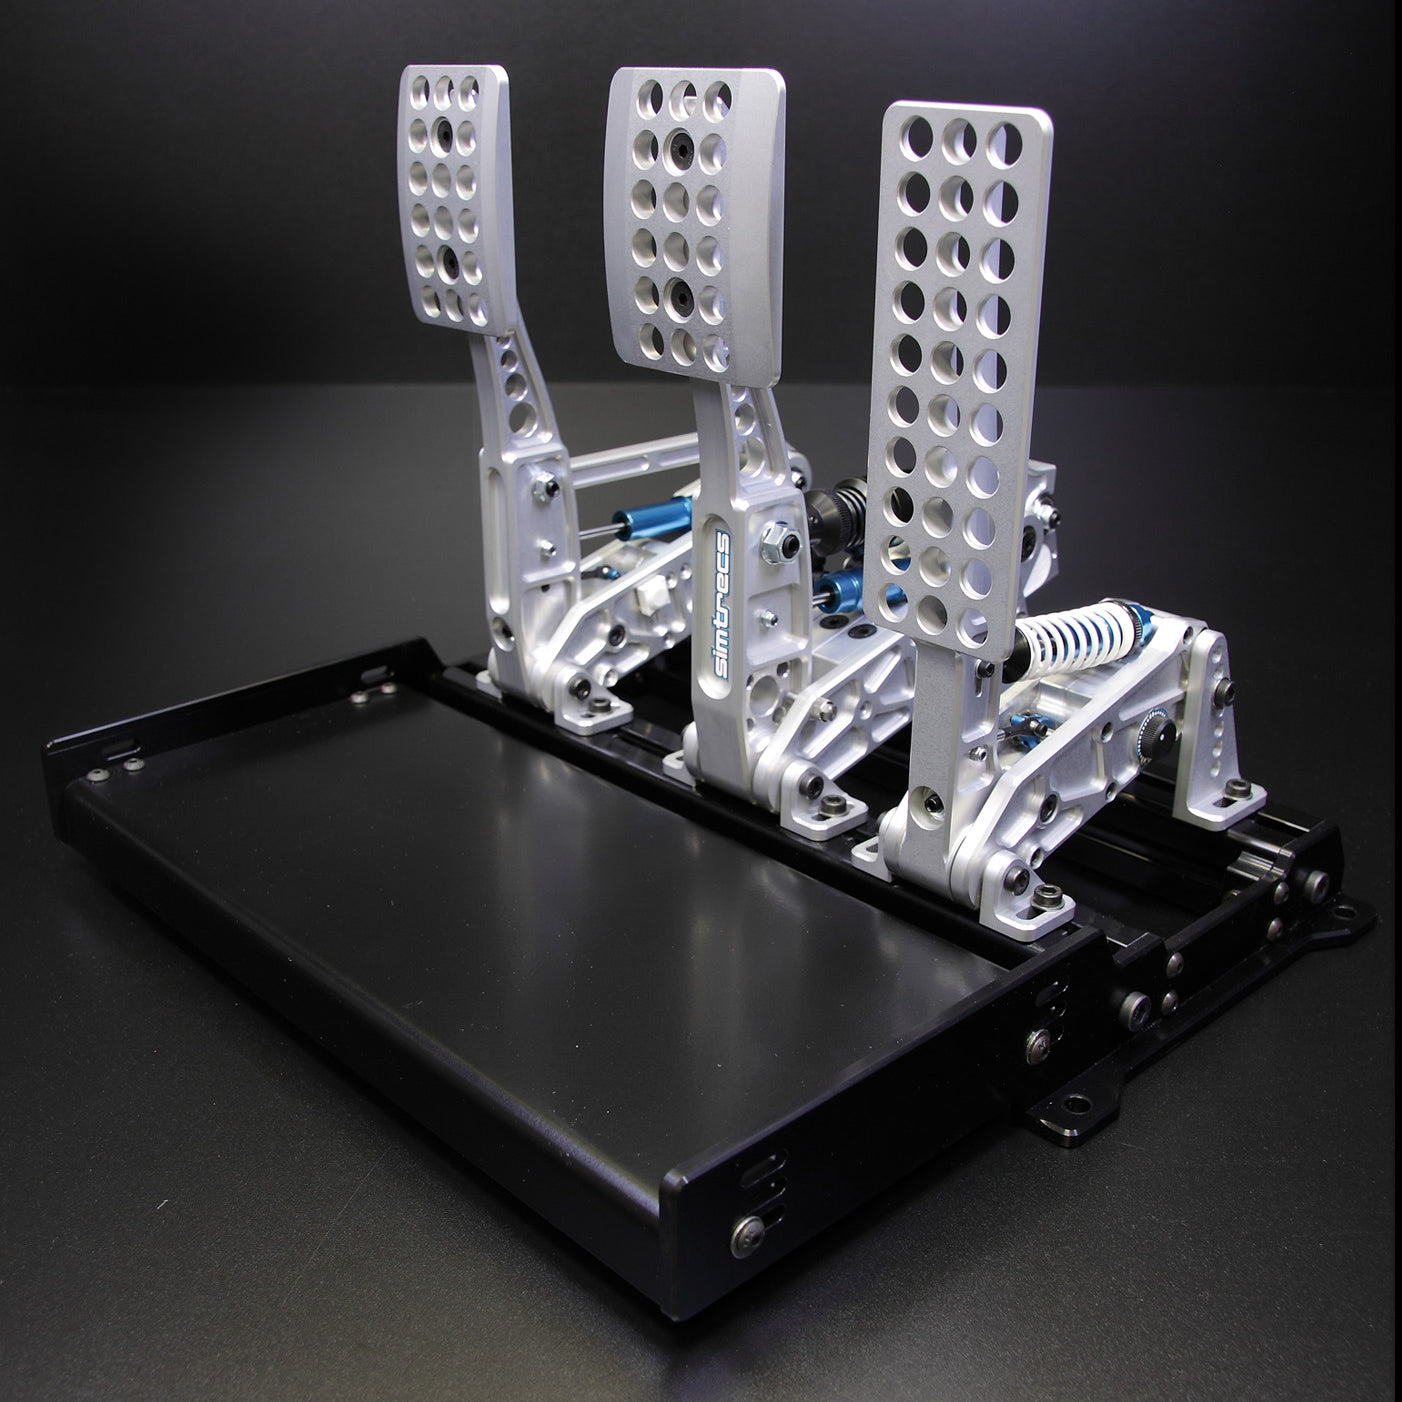 ProPedal BasePlate